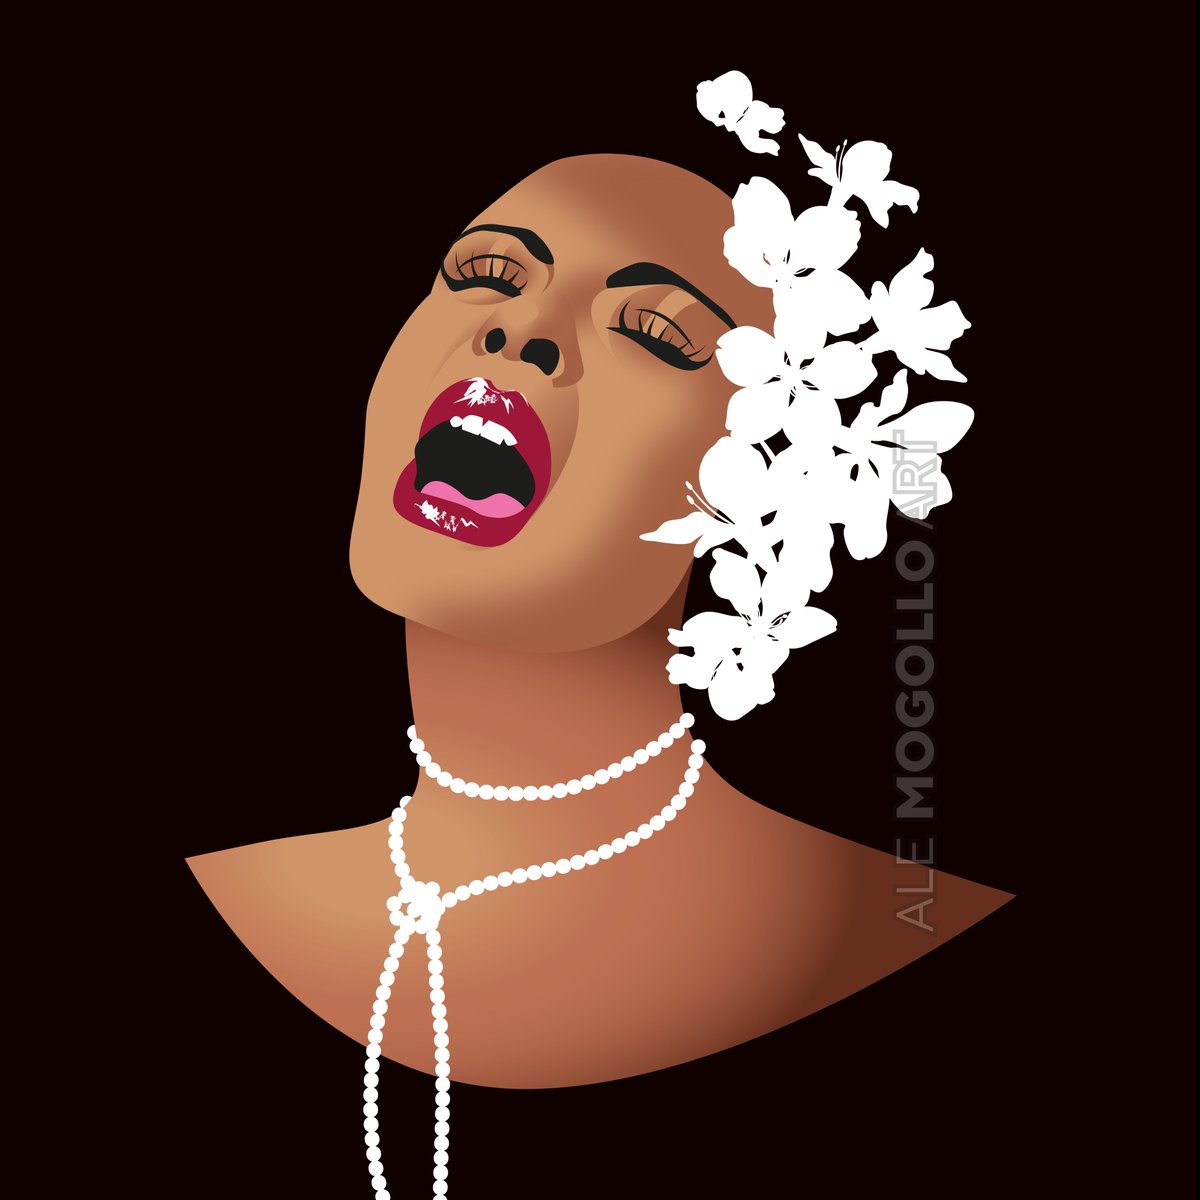 Remembering the legendary Lady Day on her birthday. When I was in my teens, and my friends were listening to rock bands, I was discovering the world-weary sounds of #BillieHoliday, and I was utterly fascinated by the unique style of her voice. Do you have a favorite song? #billie